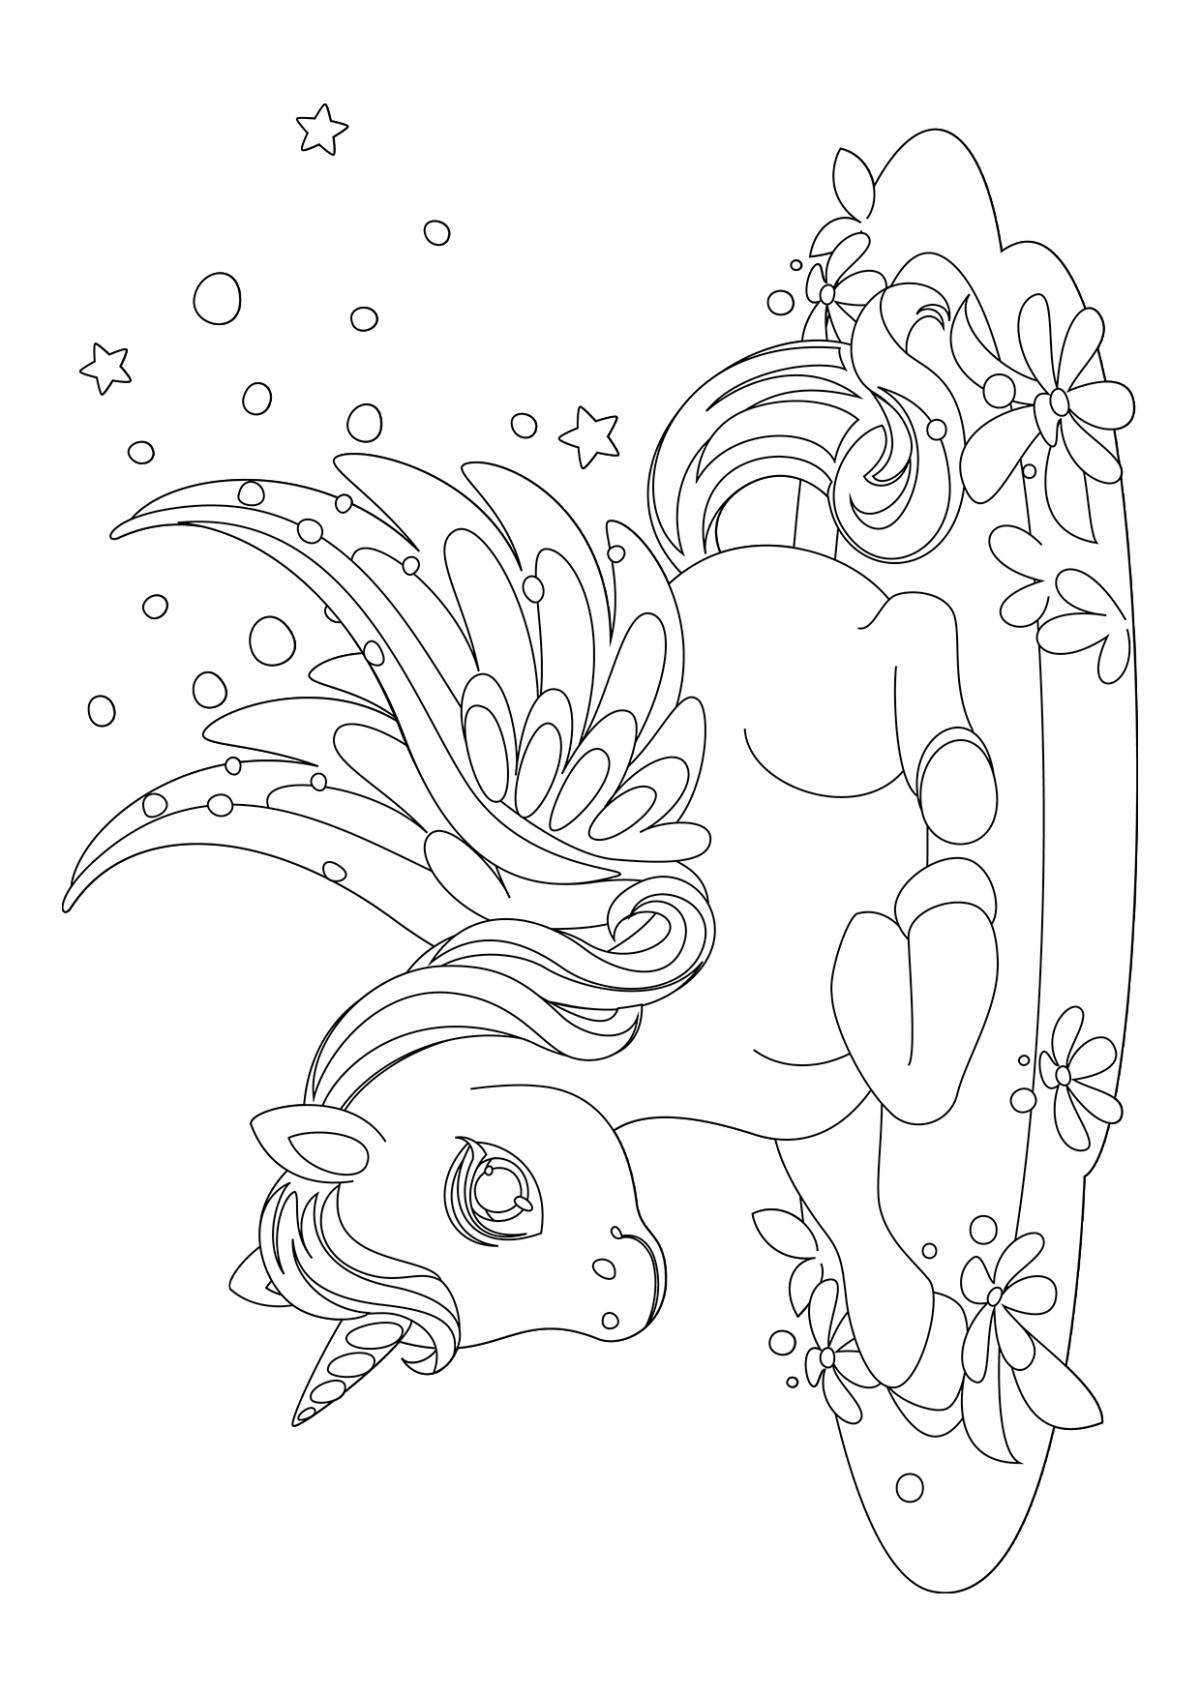 Coloring book unicorn for children 6-7 years old